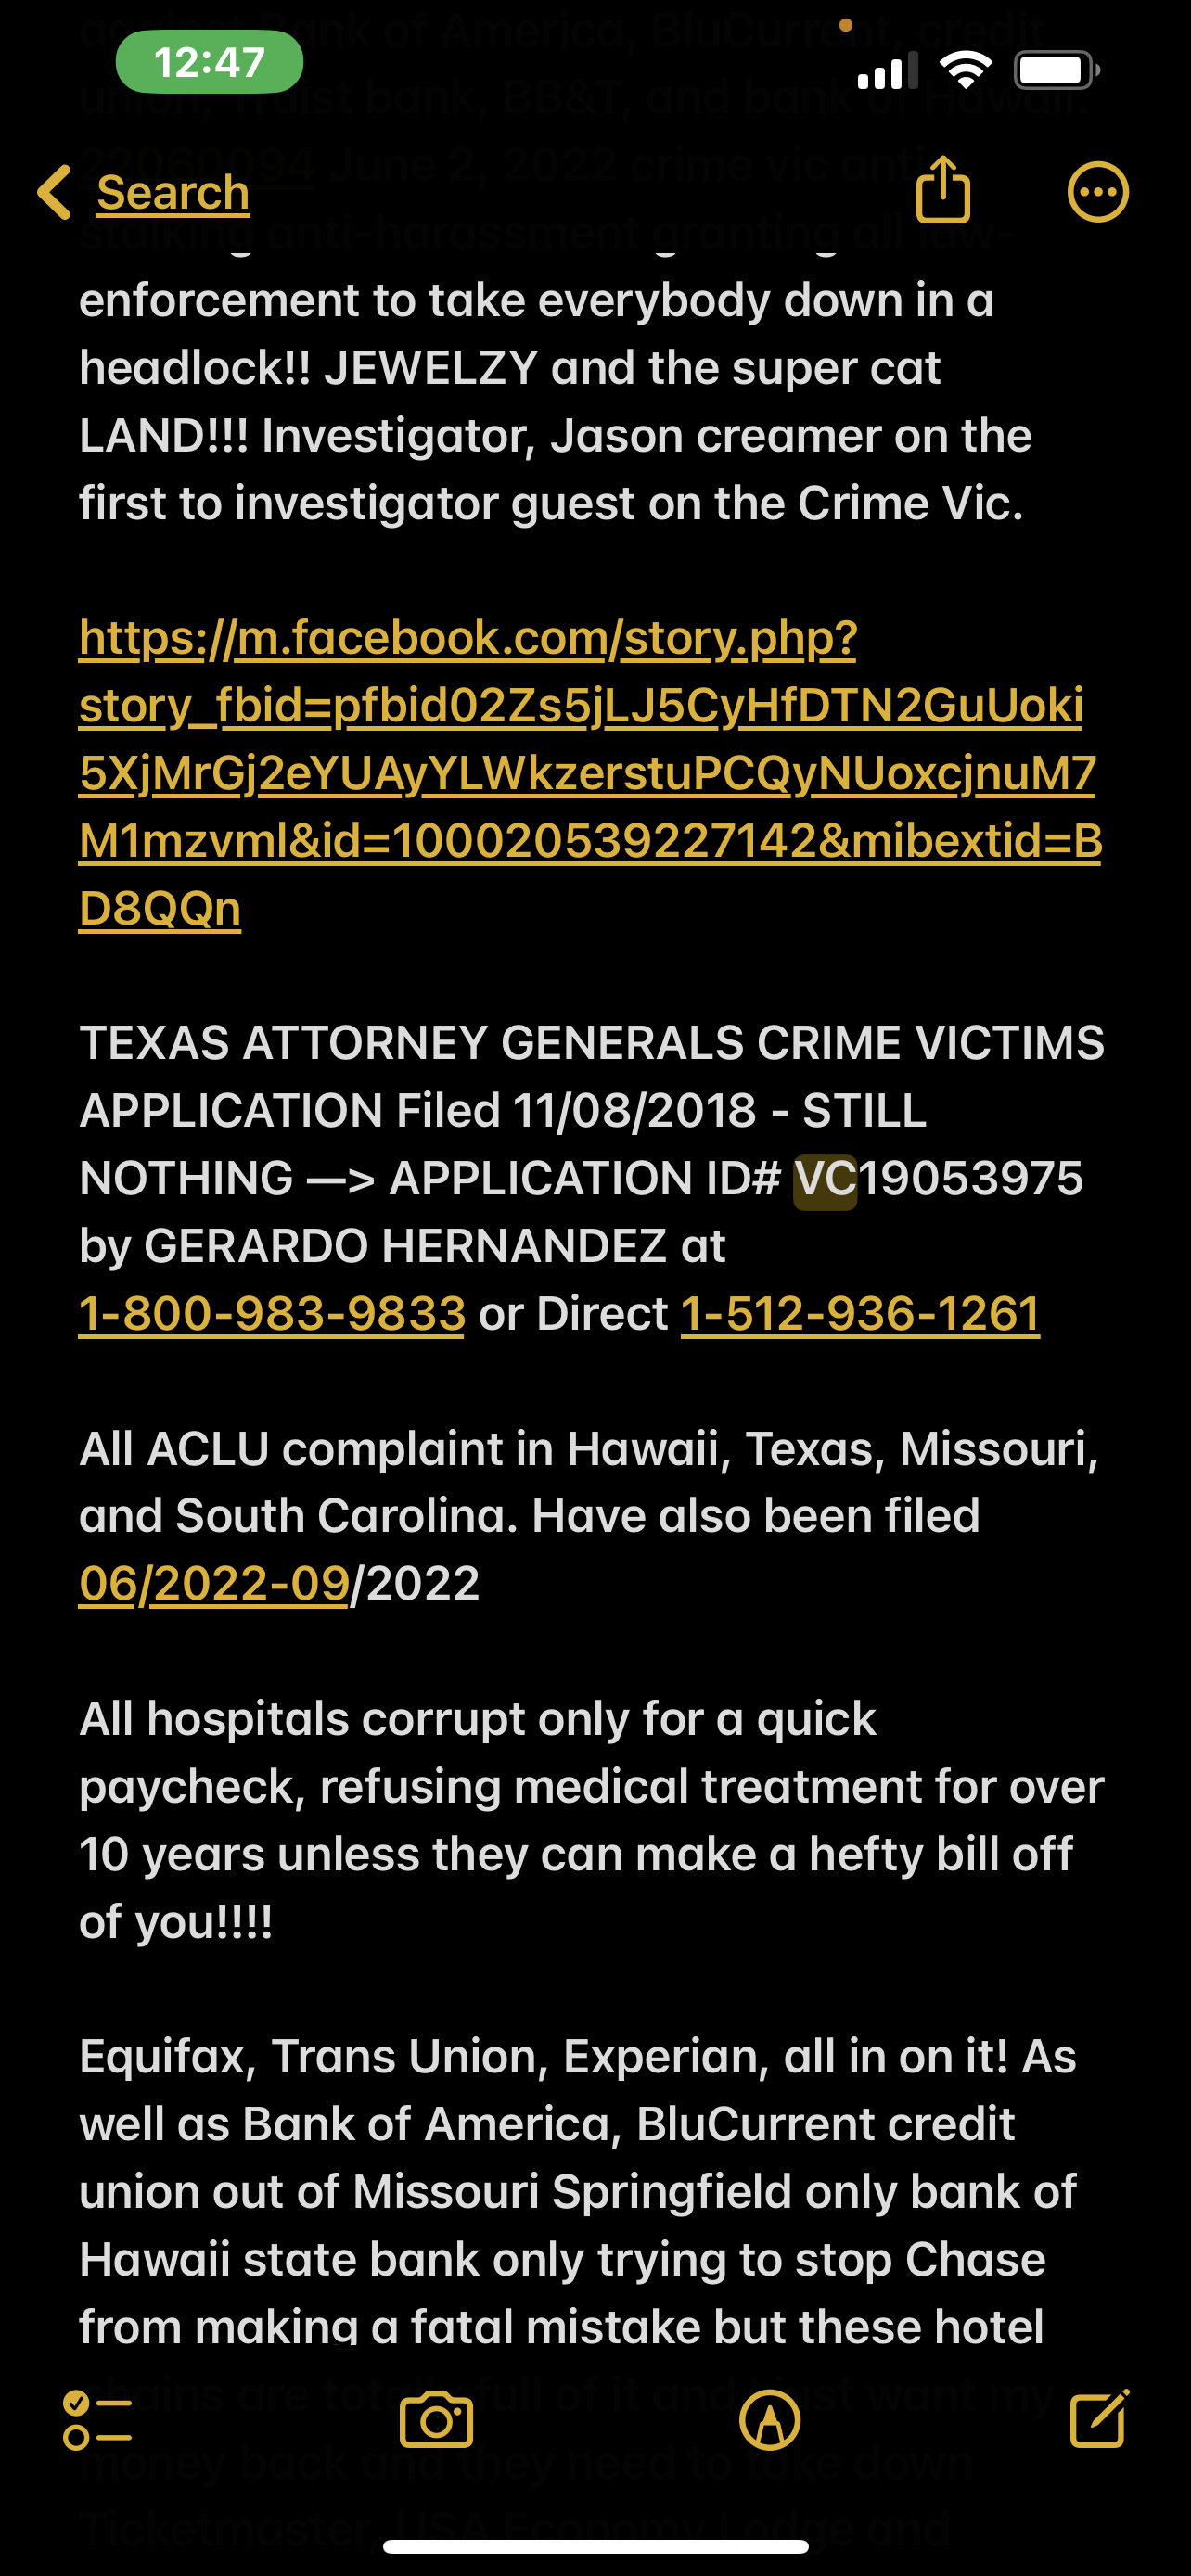 ACLU complaints filed June 2020 to September 2022